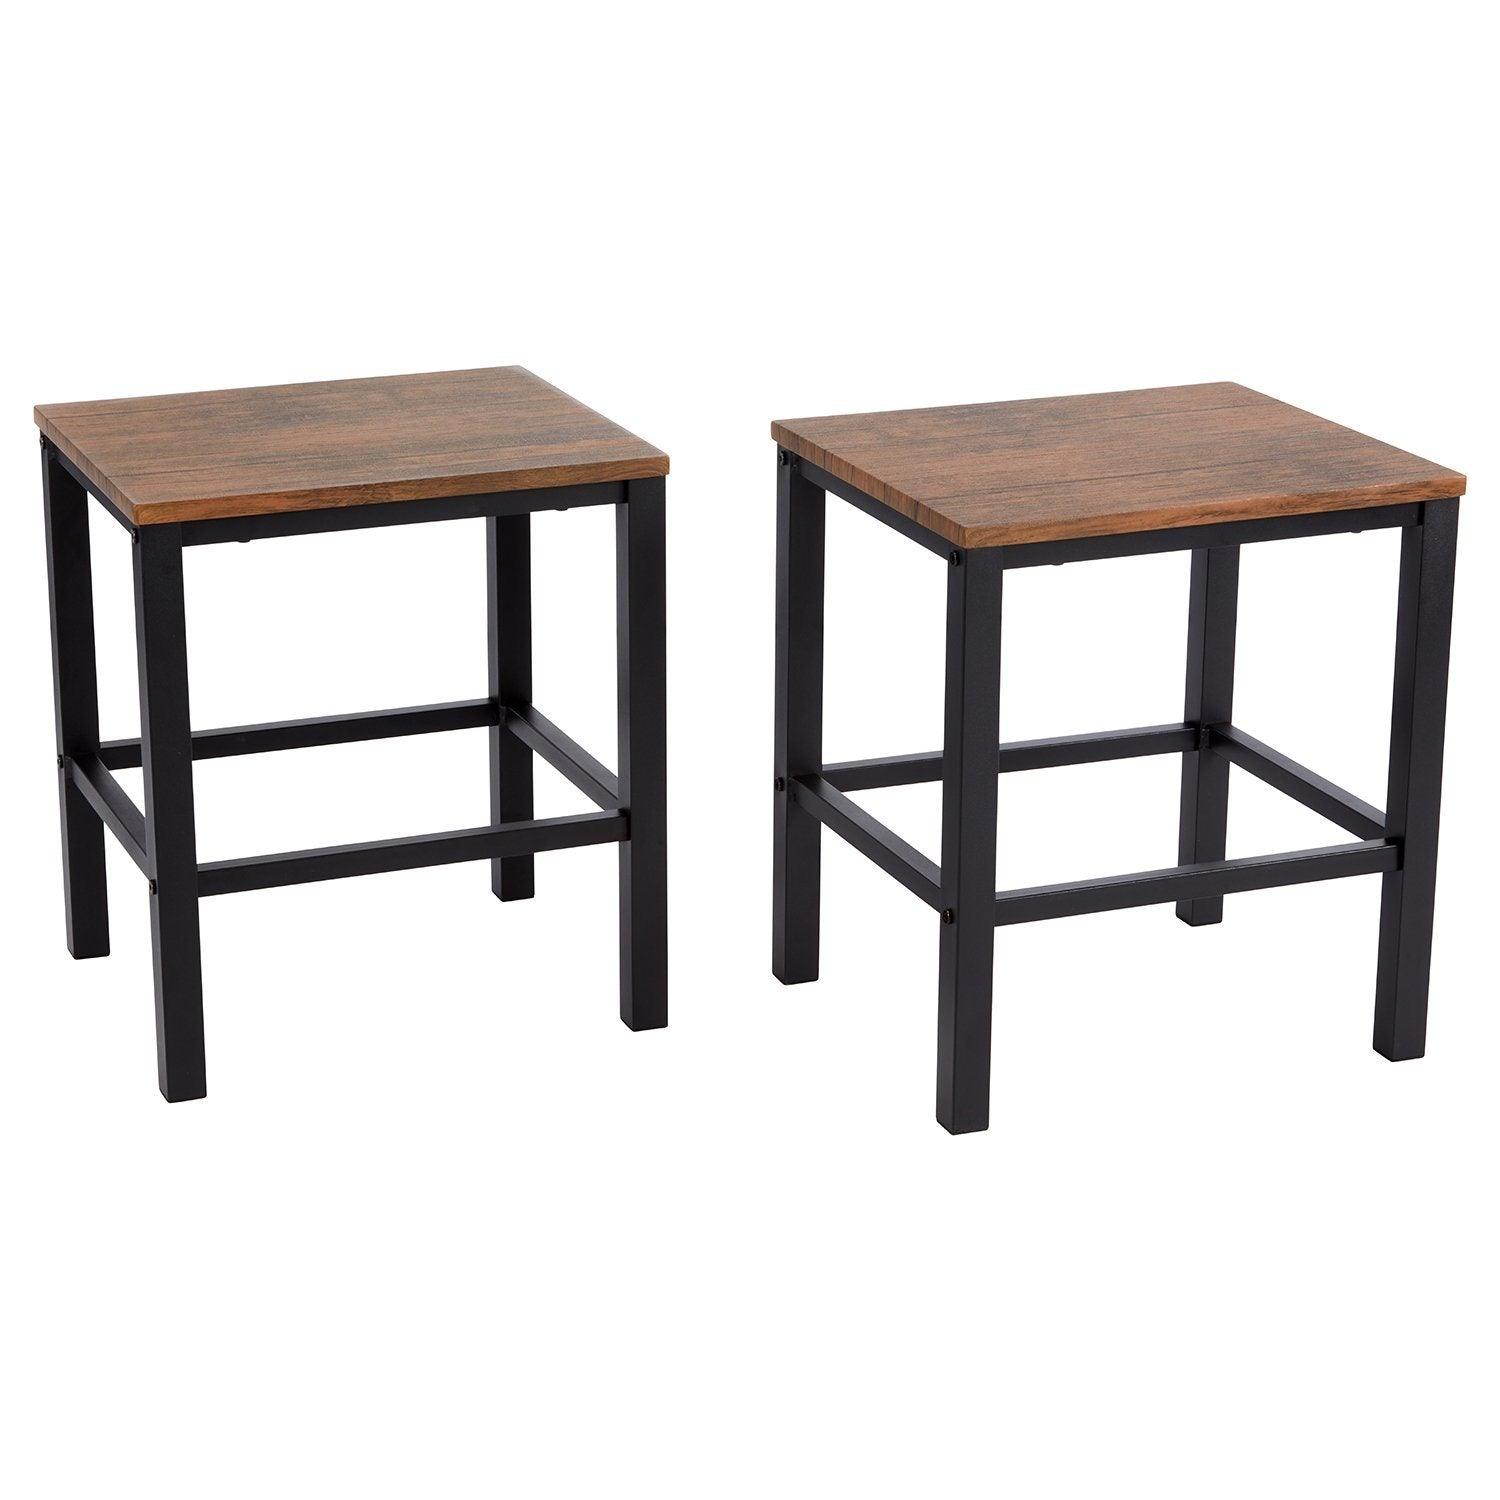 Sheffield dining table set – 4 seater – 4 stools - Laura James